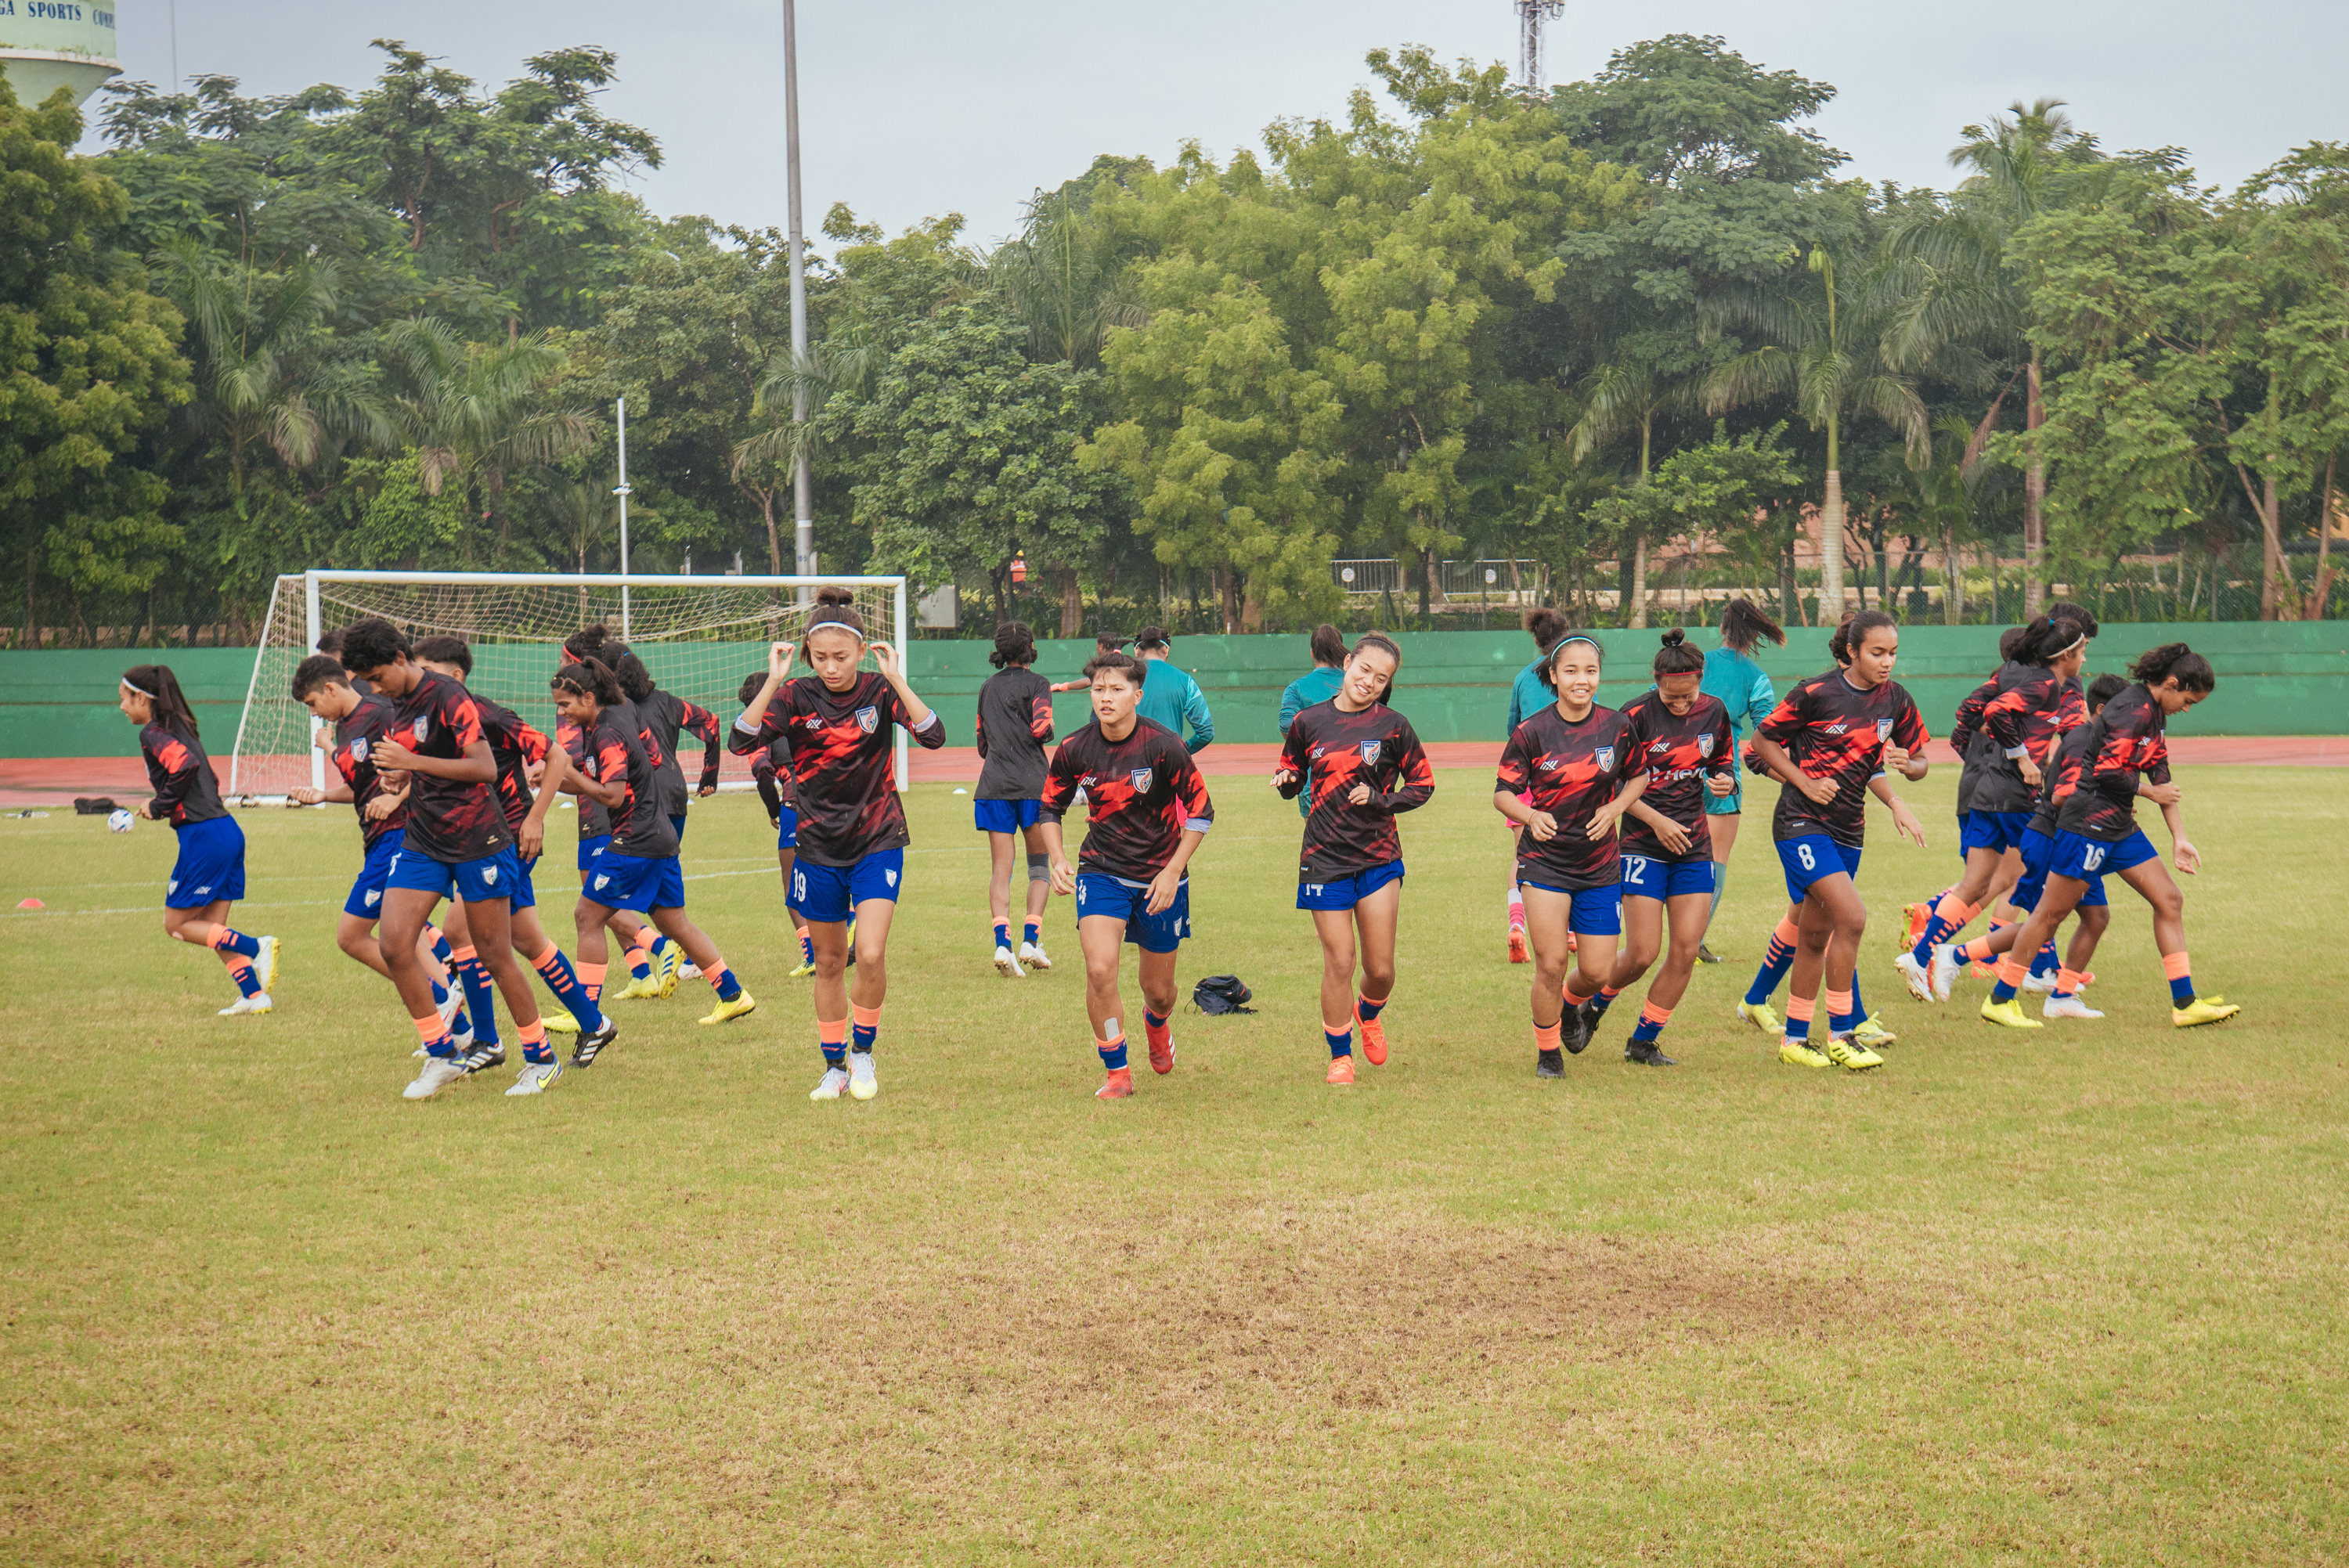 FIFA U17 Women’s World Cup: Analyzing Indian U17 Women's Football Team performance and problems ahead of the tournament- Check Out